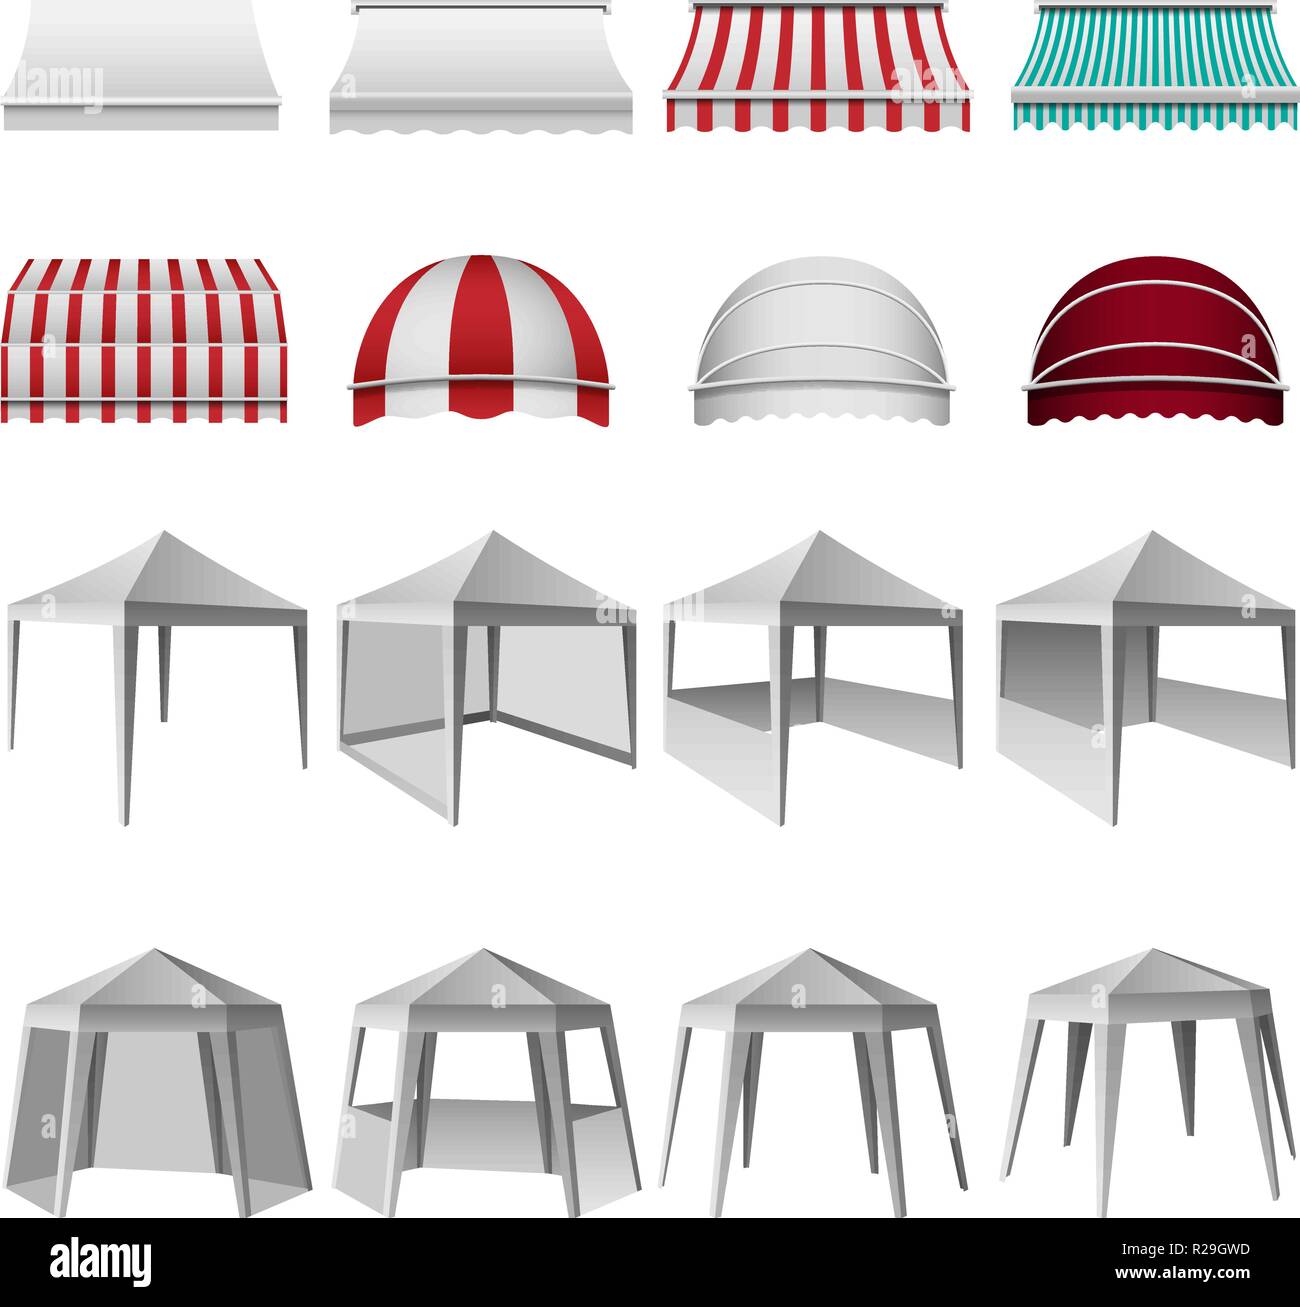 Download Canopy shed overhang awning mockup set. Realistic ...